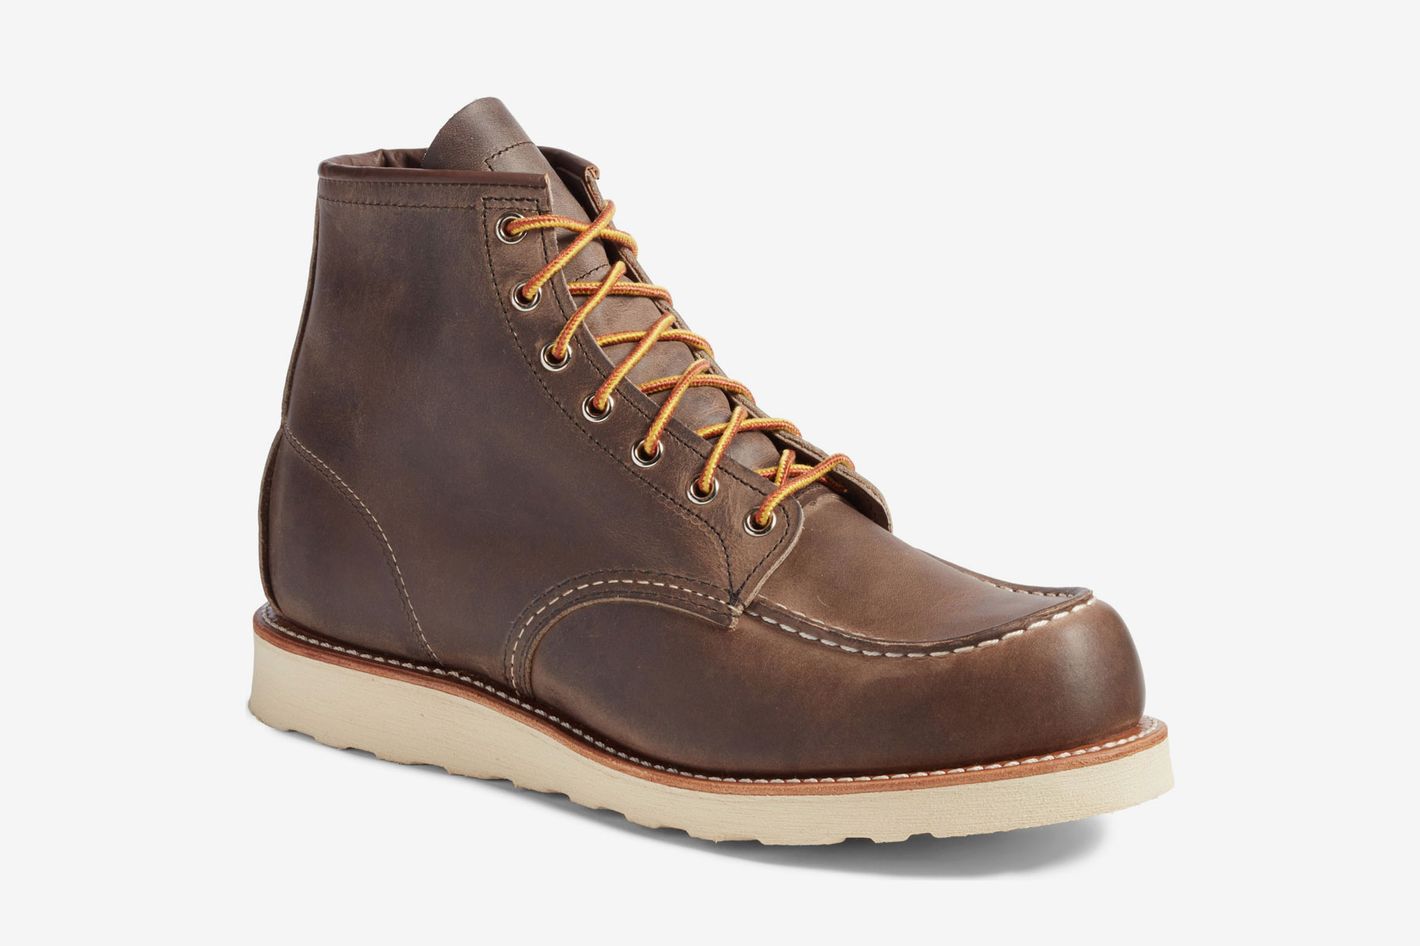 7 Best Work Boots for Men 2018: Red Wing, Timberland